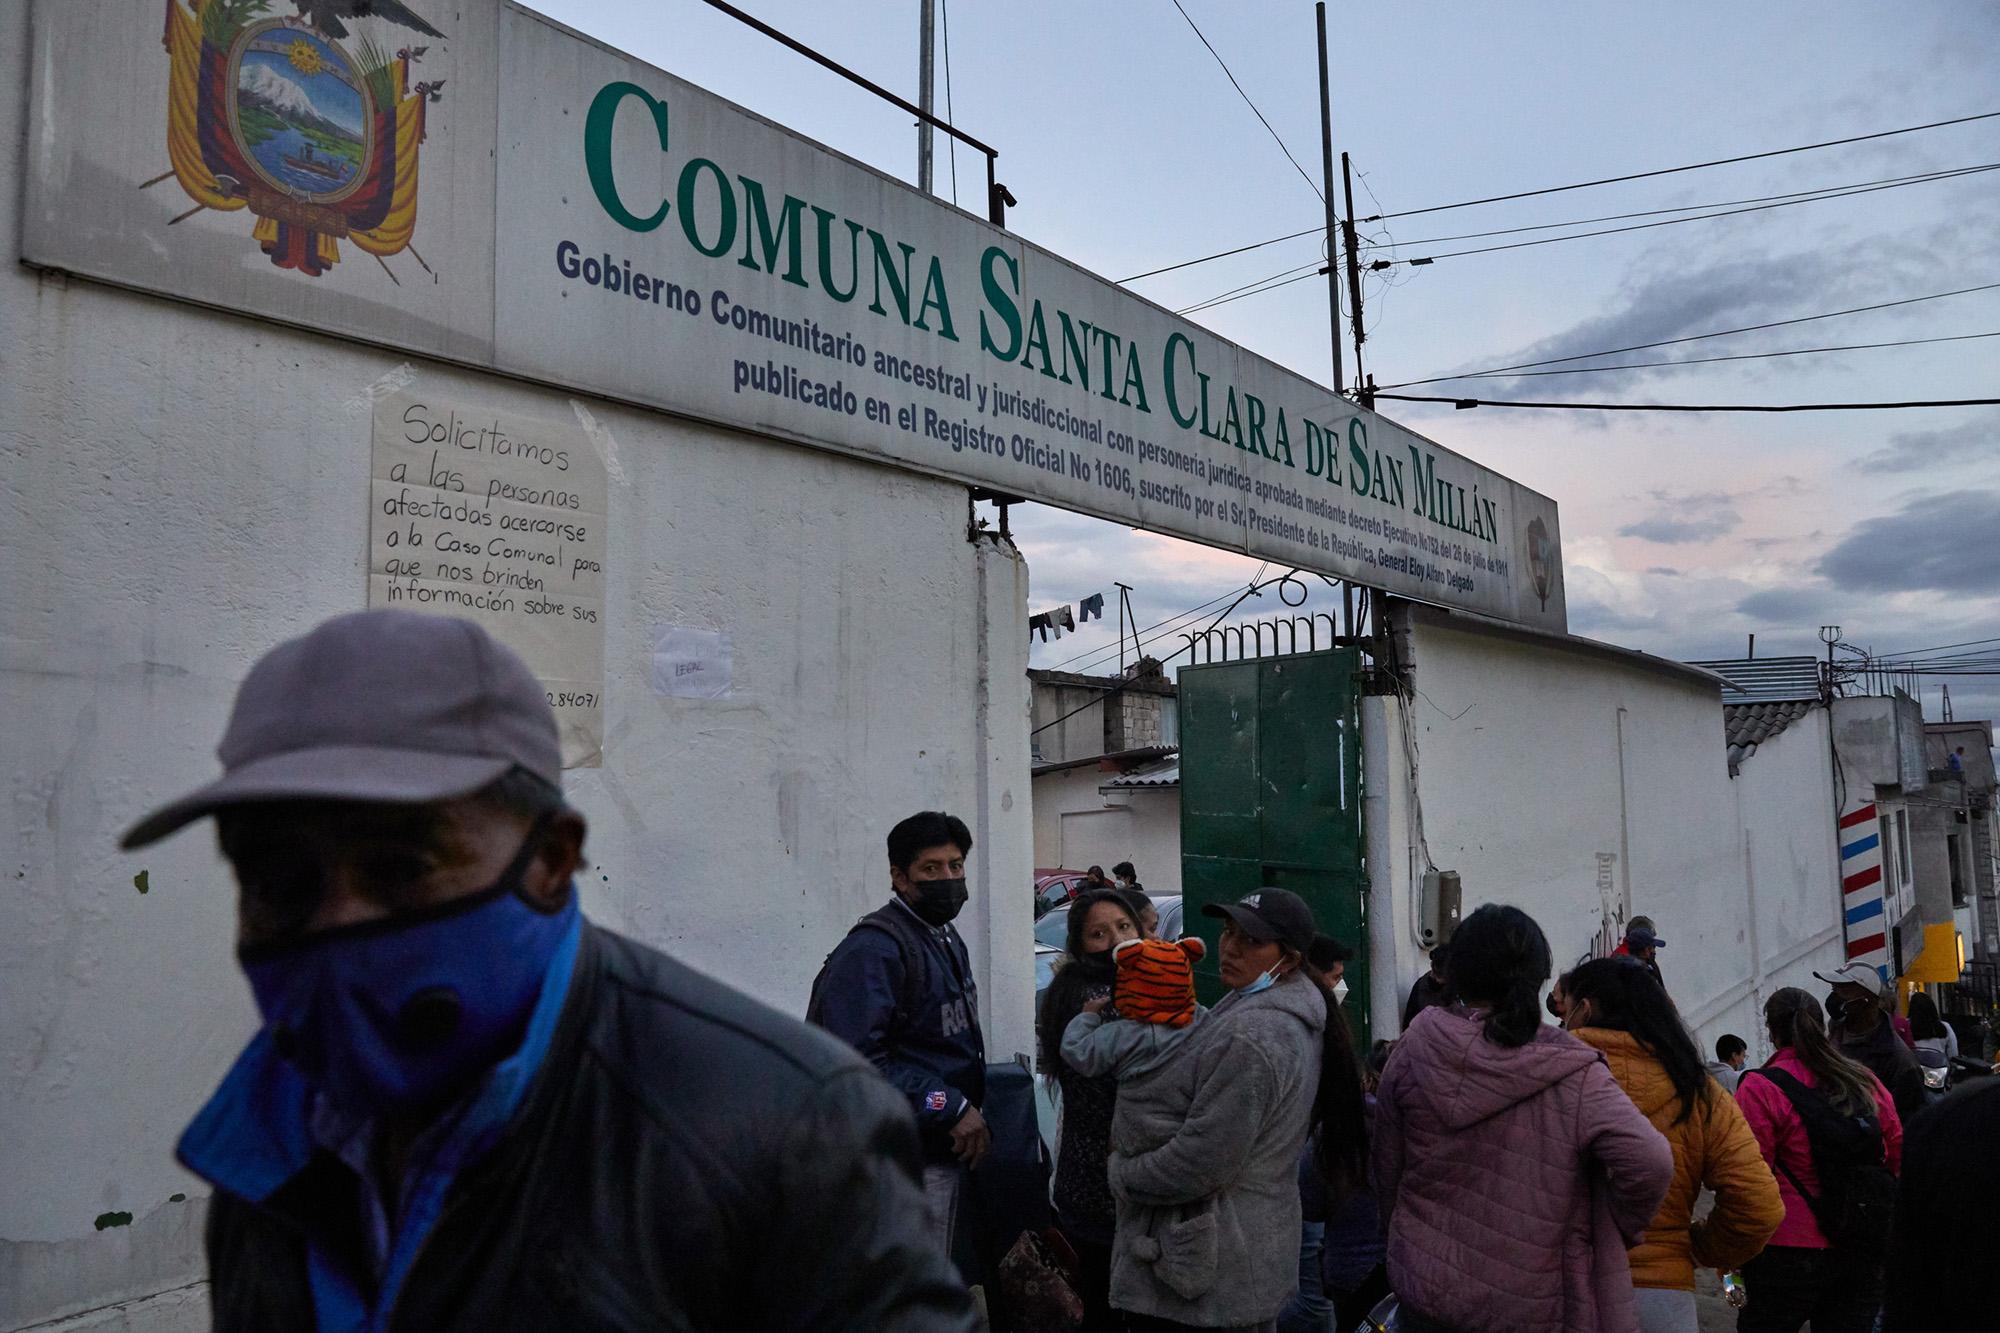 Residents of La Comuna neighborhood, the most affected area, gathered at the community house to...